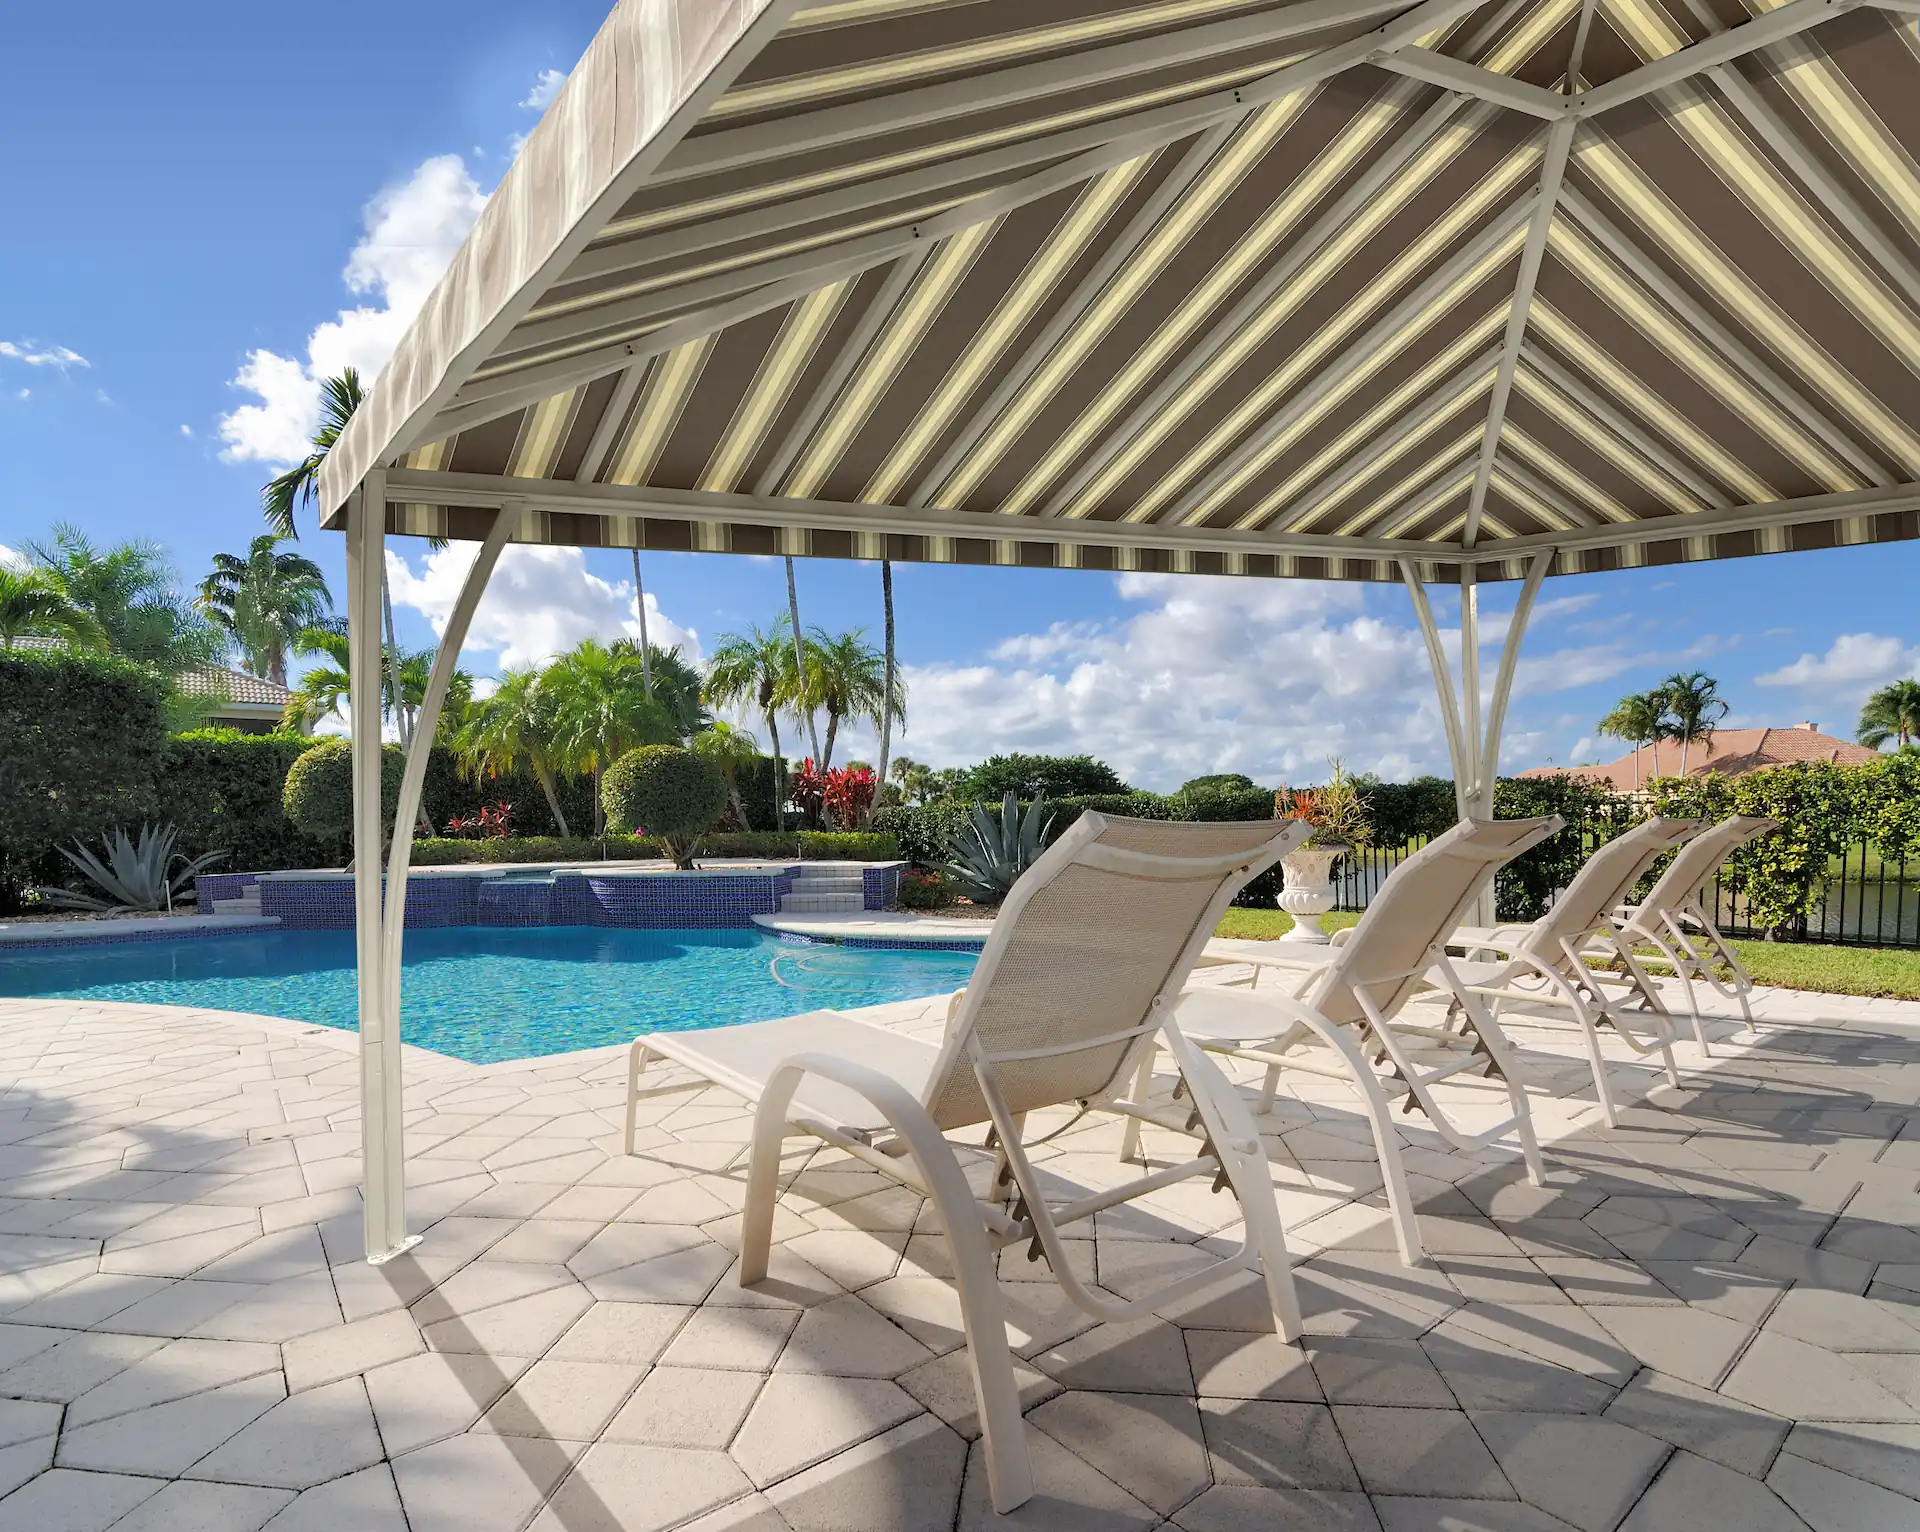 A cabana with a grey and white striped covering sits in the sun next to a pool. Enjoying the scenery and resting your body are just two of the activities to do in a cabana like this.